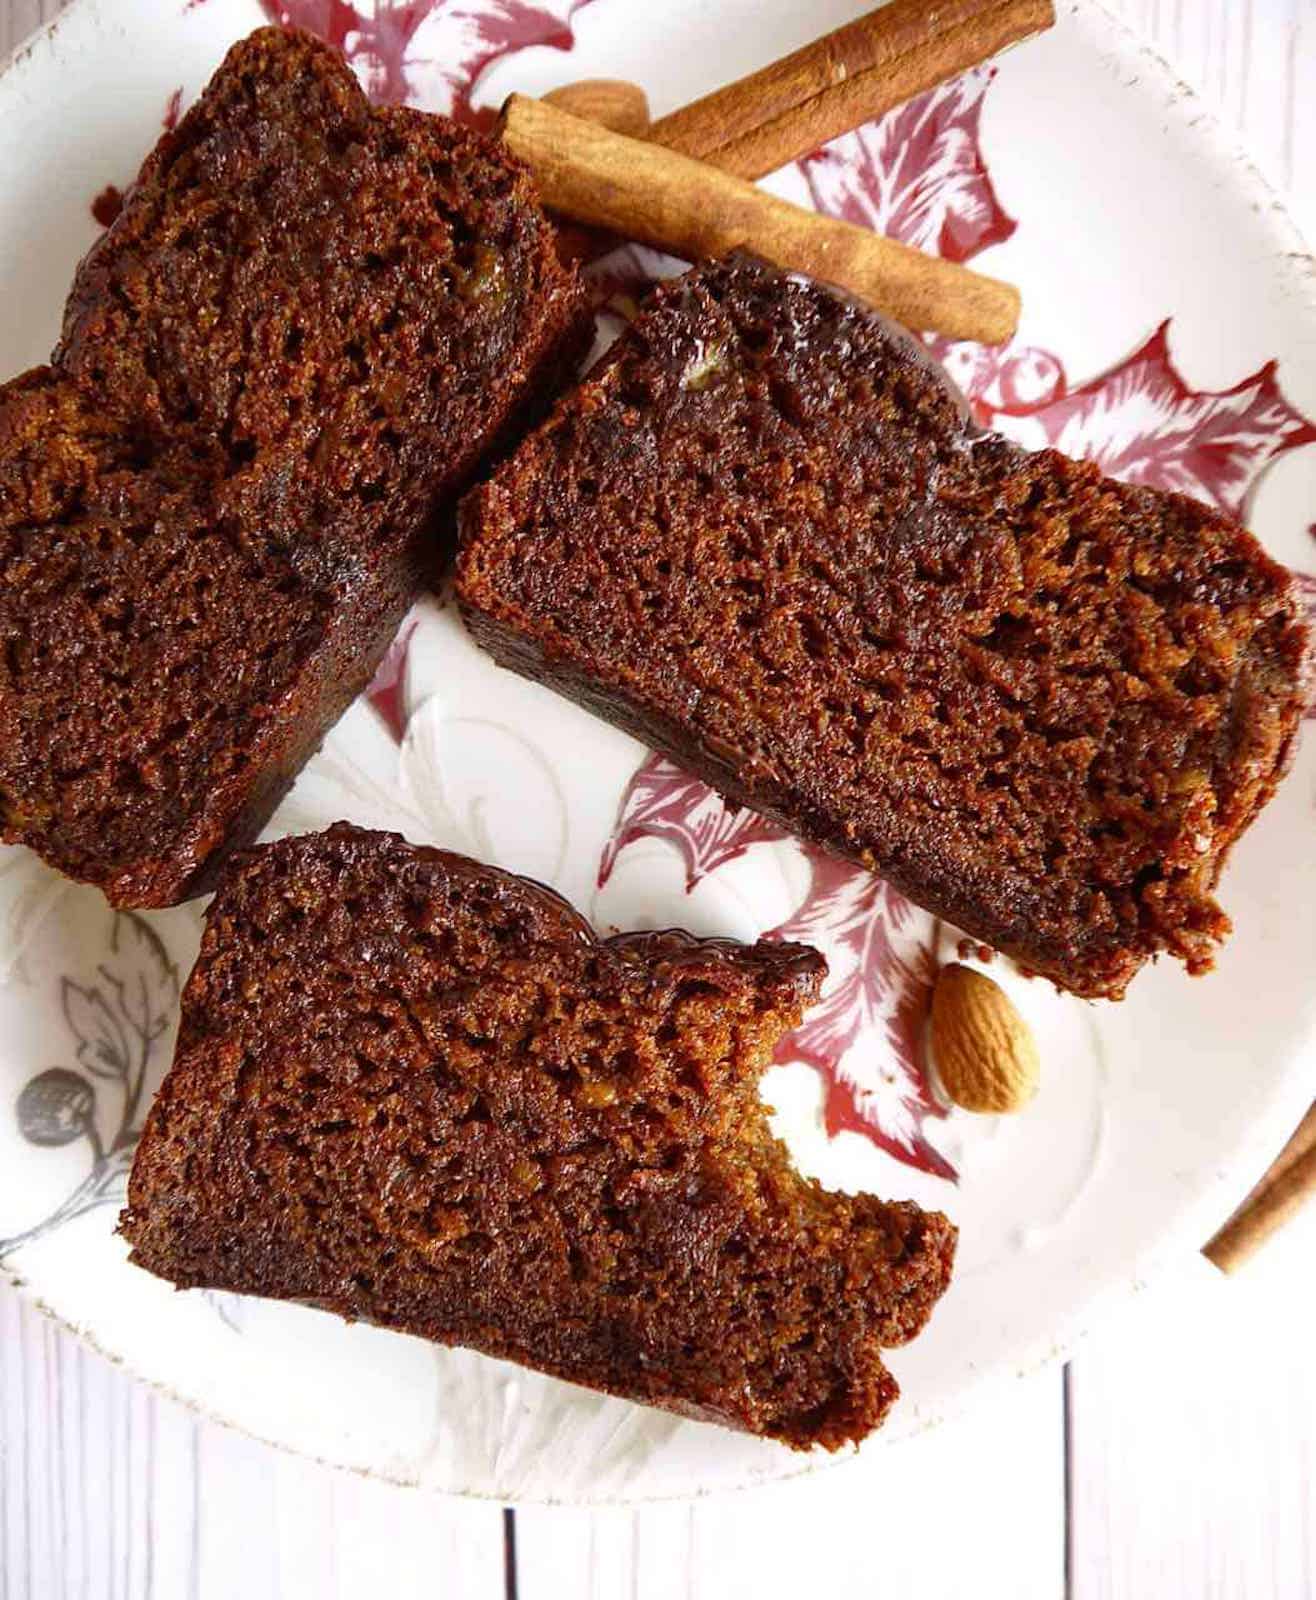 Gingerbread banana bread pieces on a plate.